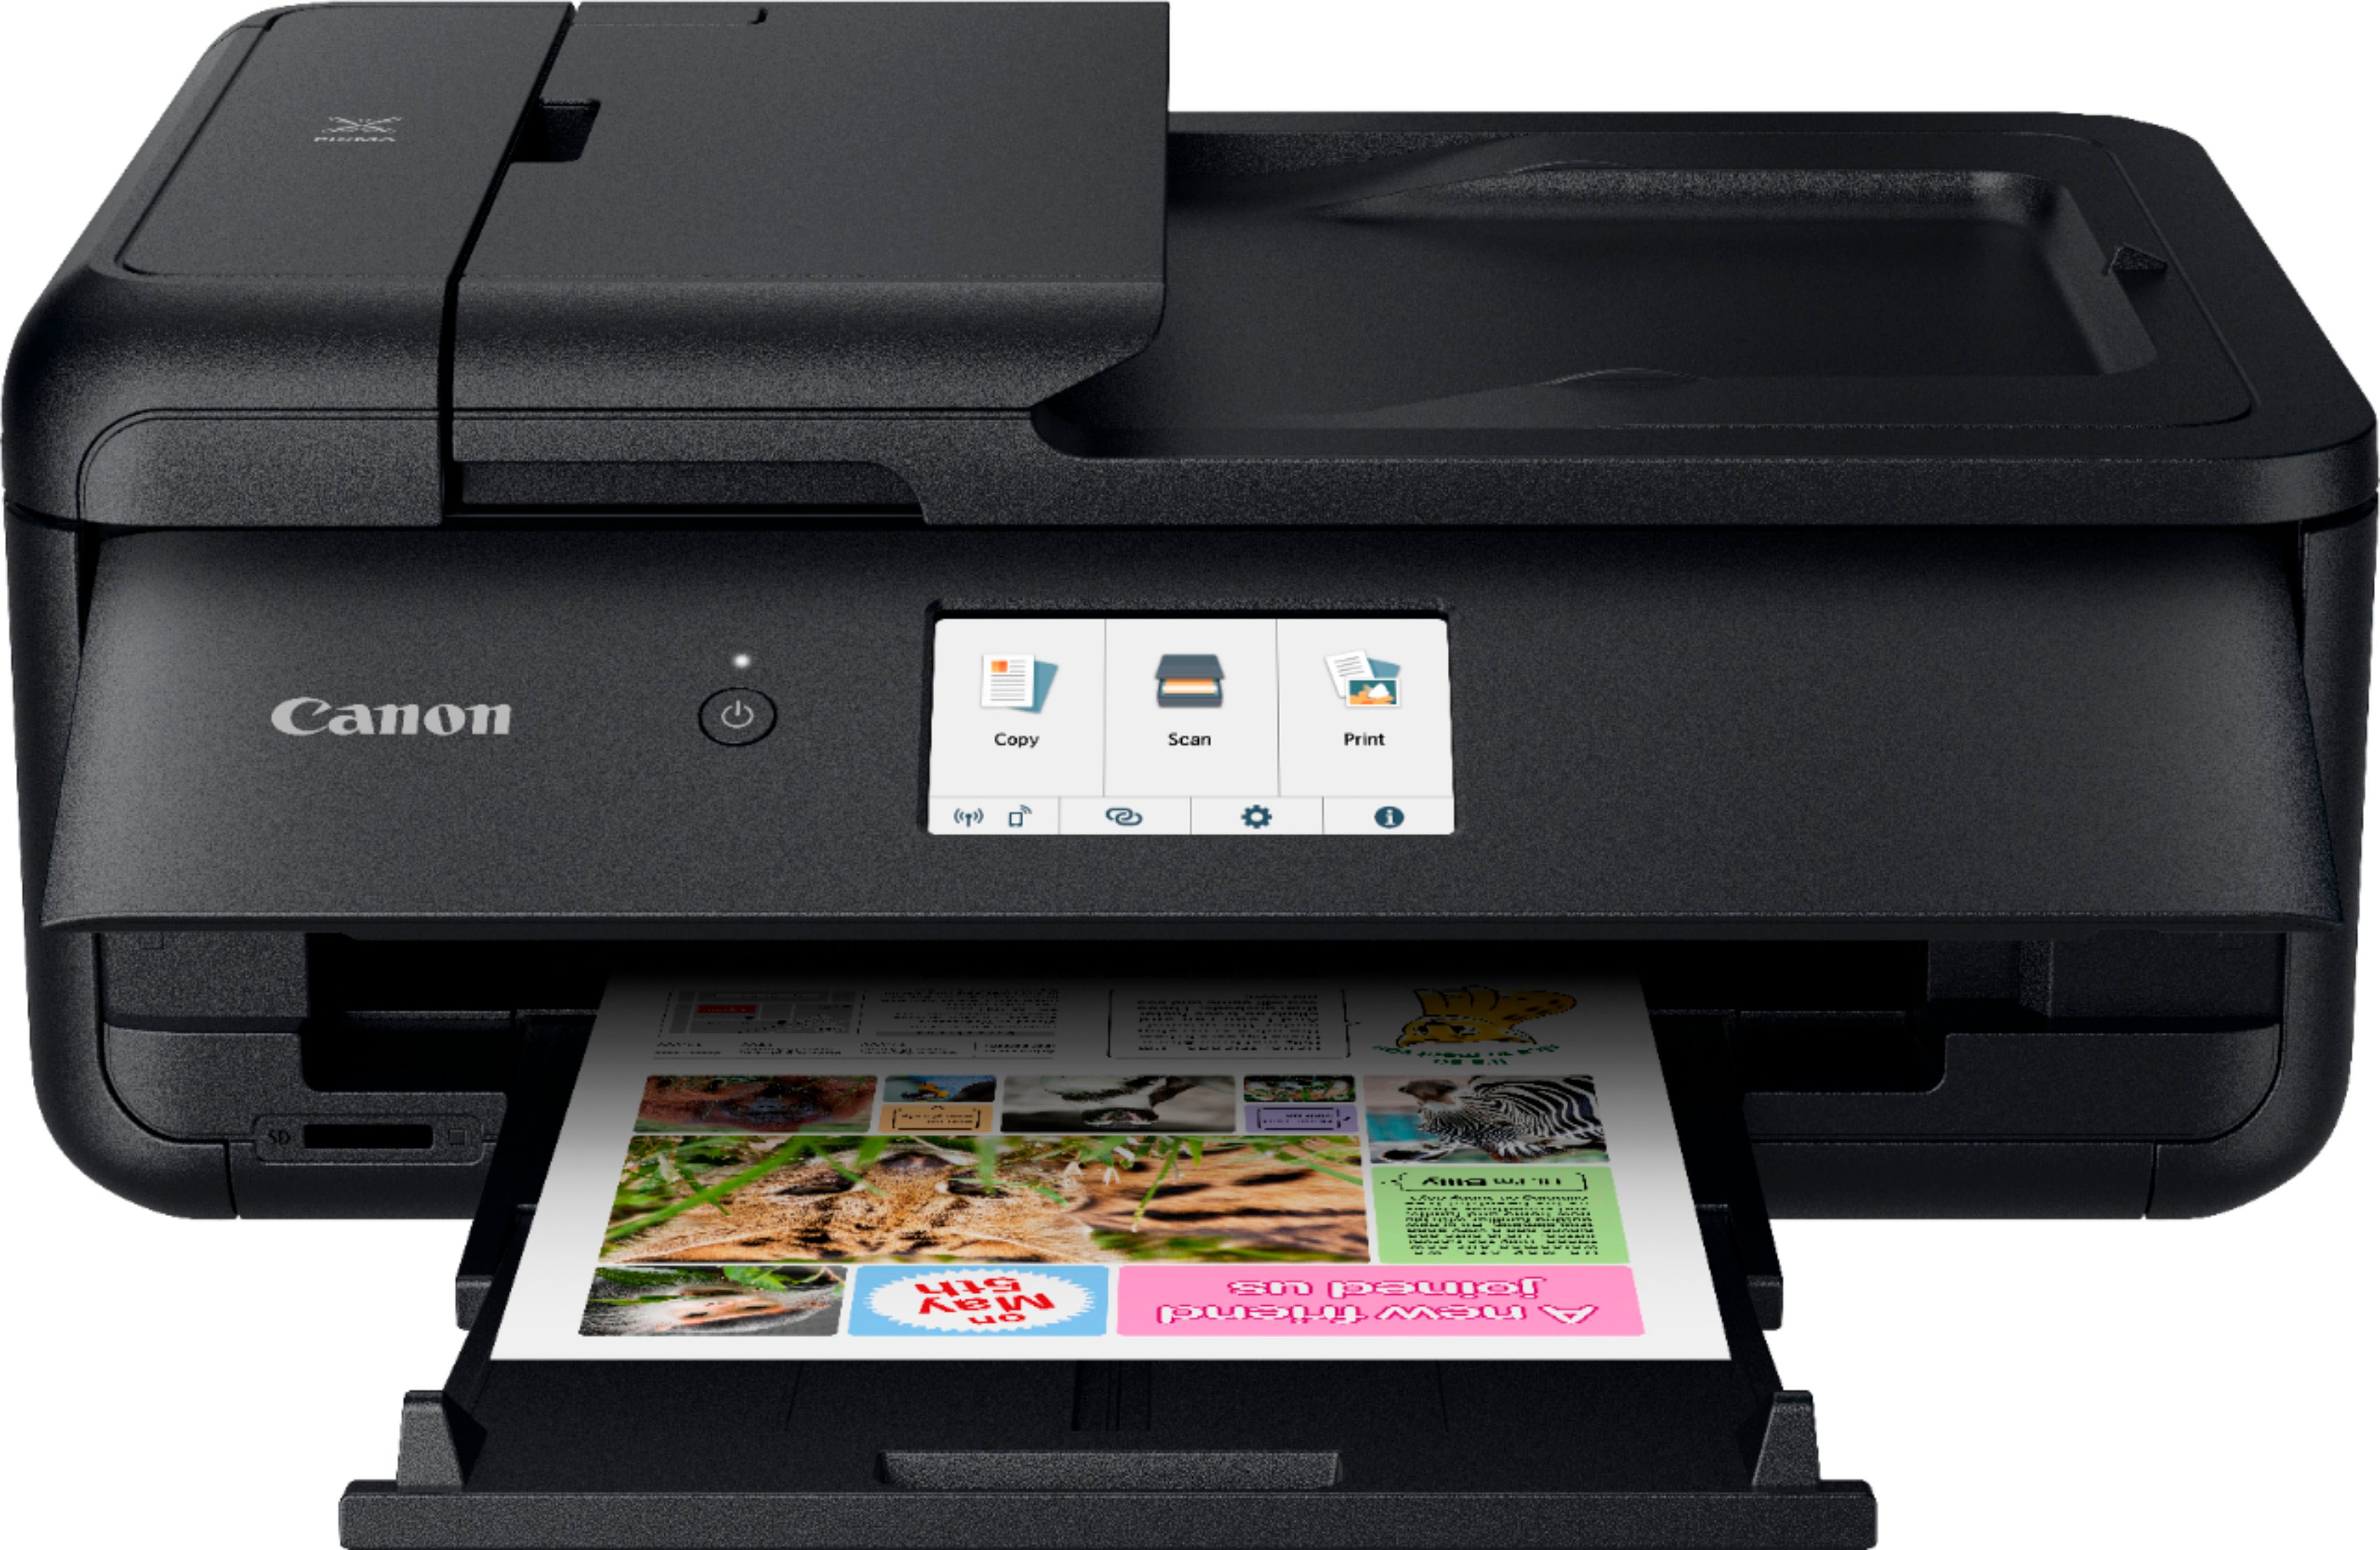 Smallest All In One Printer Online Store, Save 56% | jlcatj.gob.mx